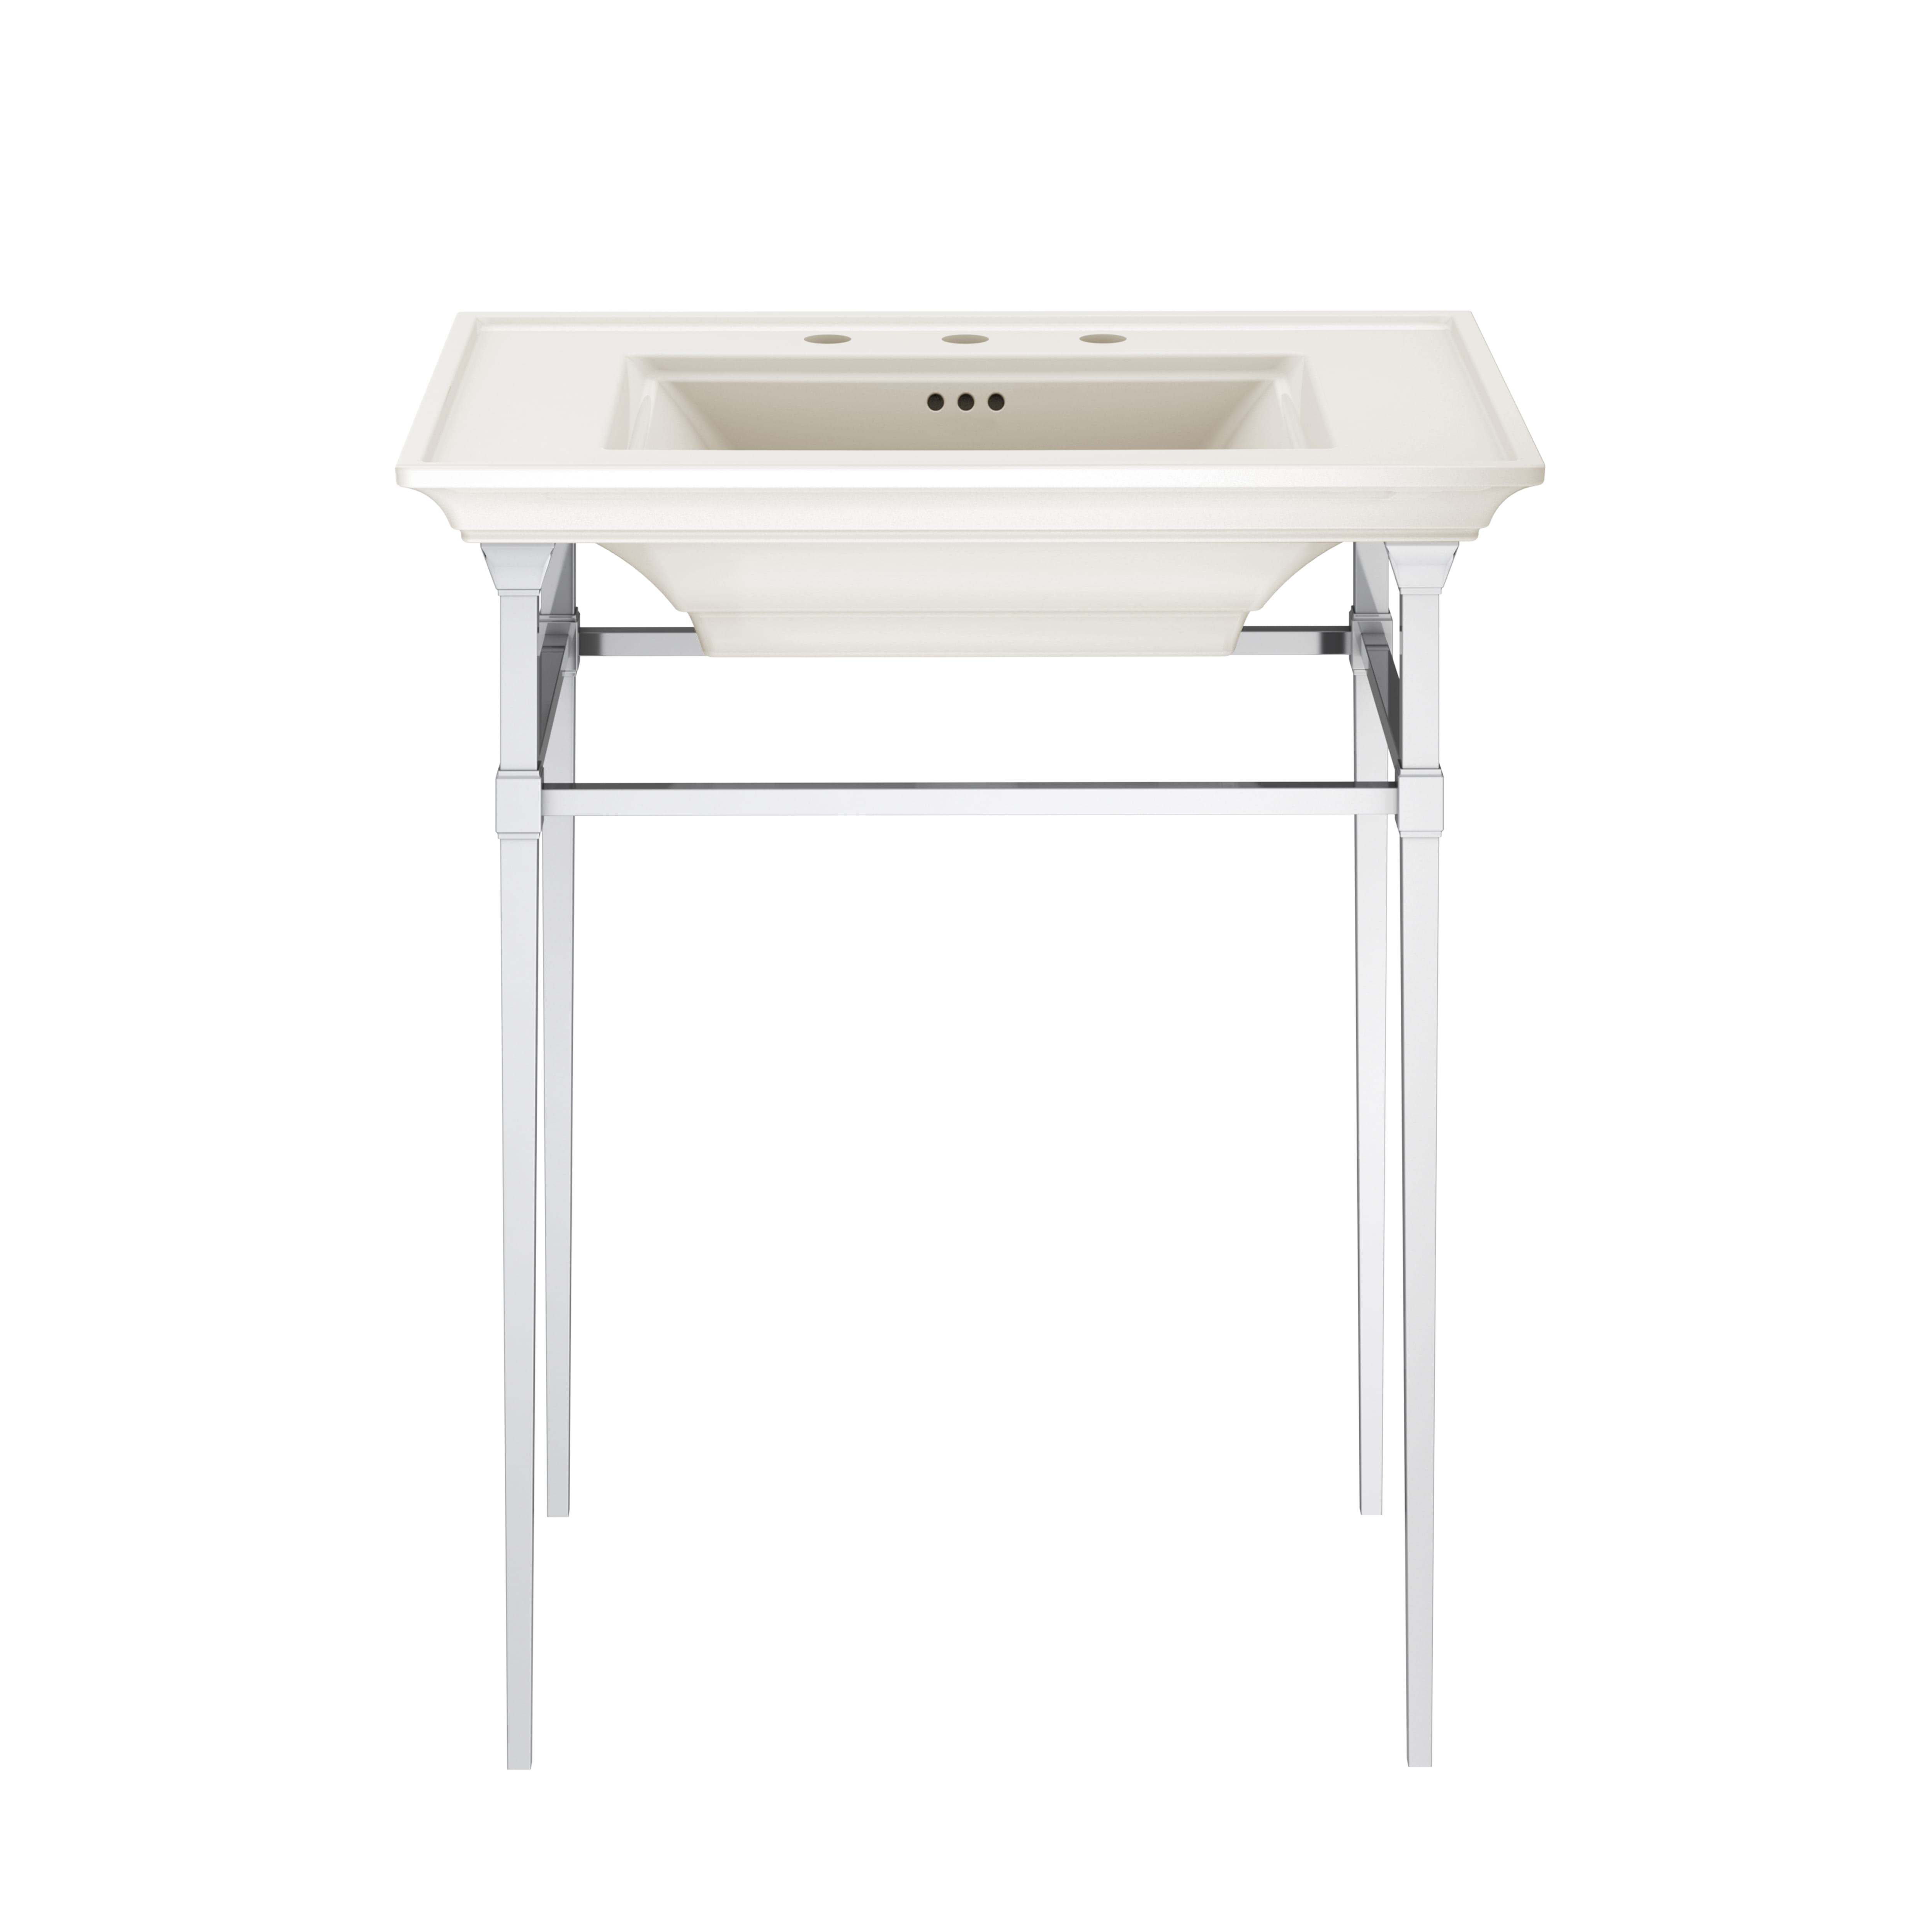 Town Square S Console Table CHROME